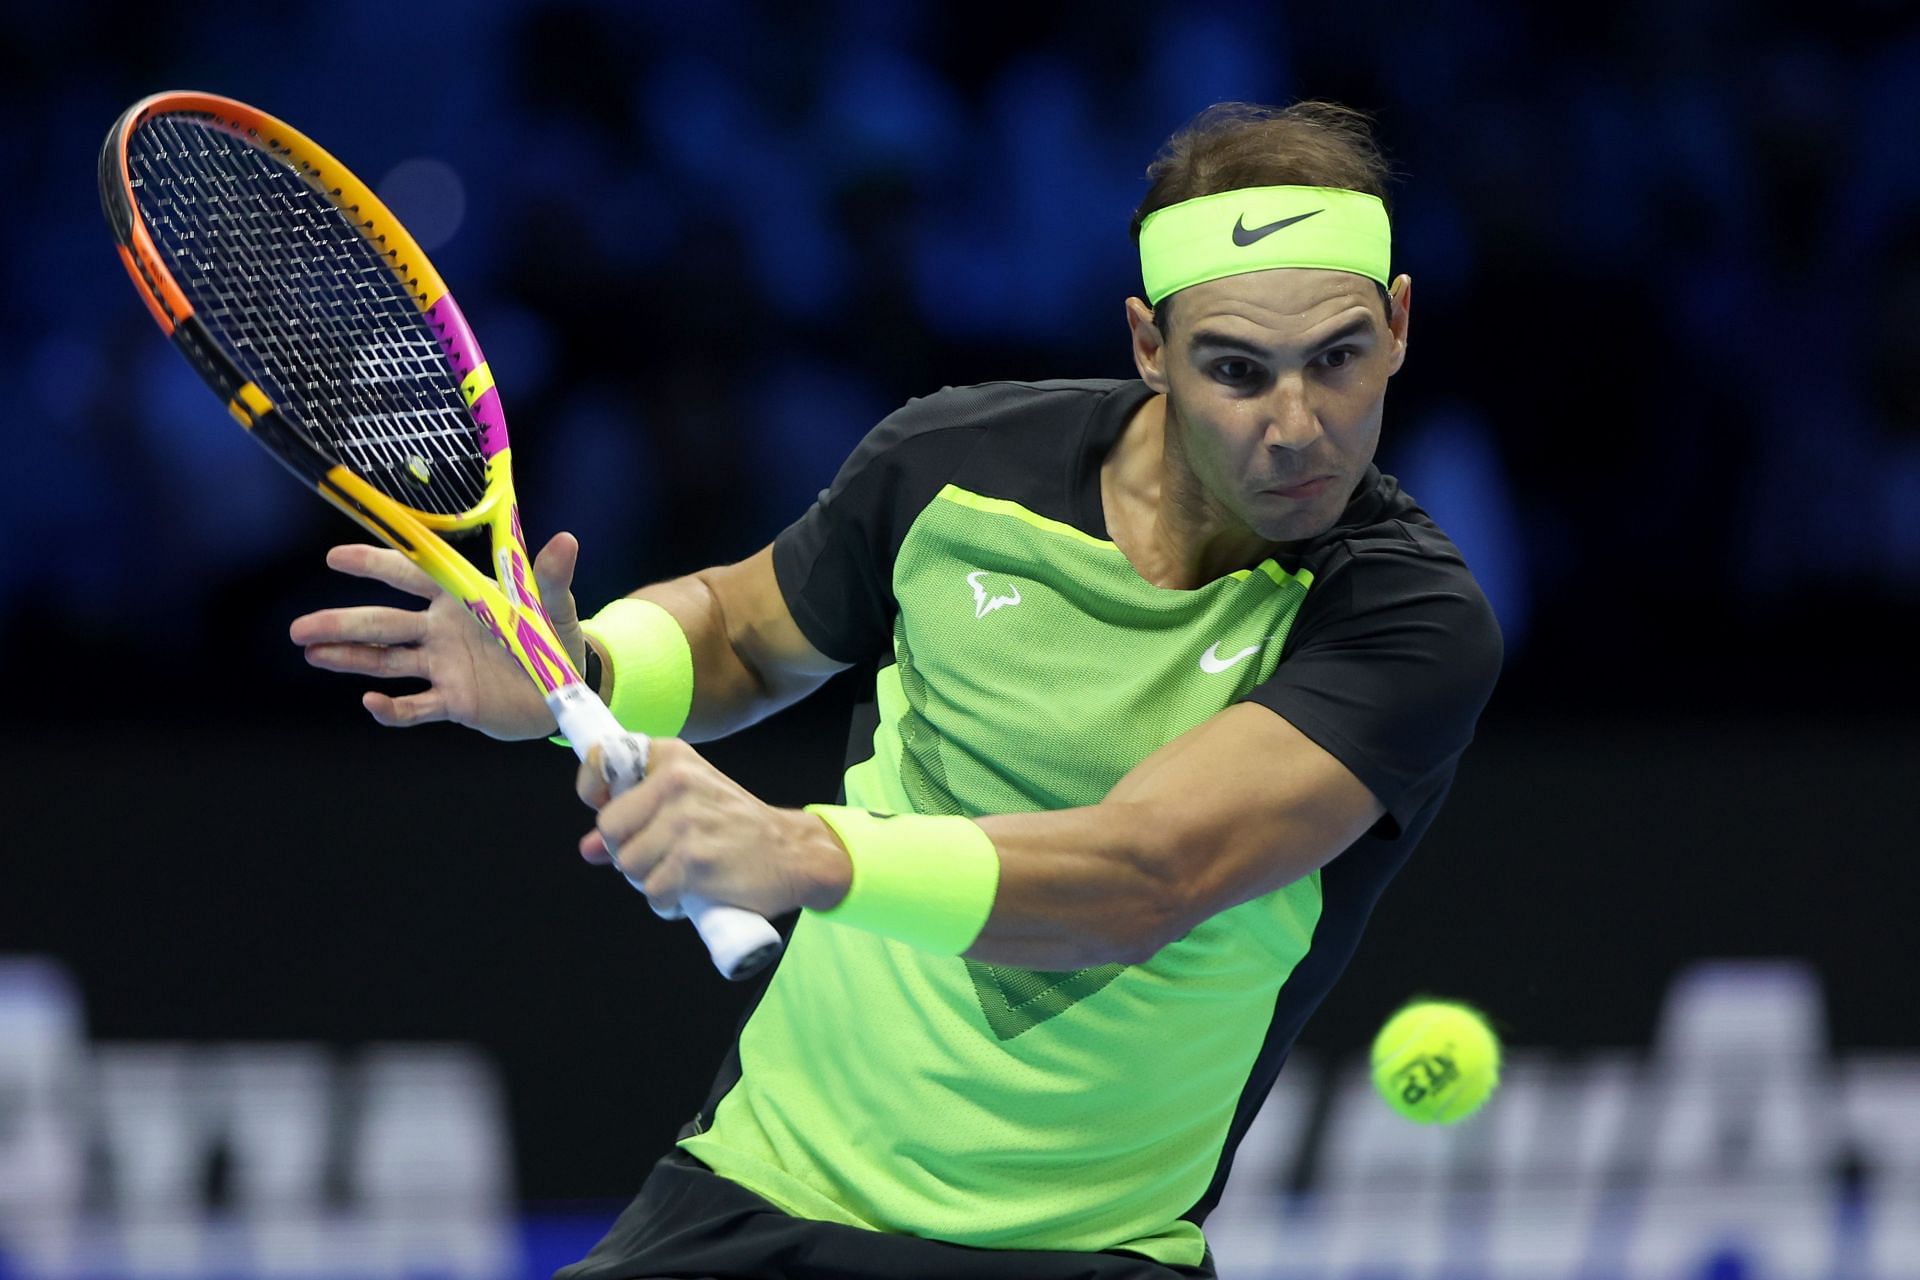 Rafael Nadal in action at the ATP Finals. (PC: Getty Images)